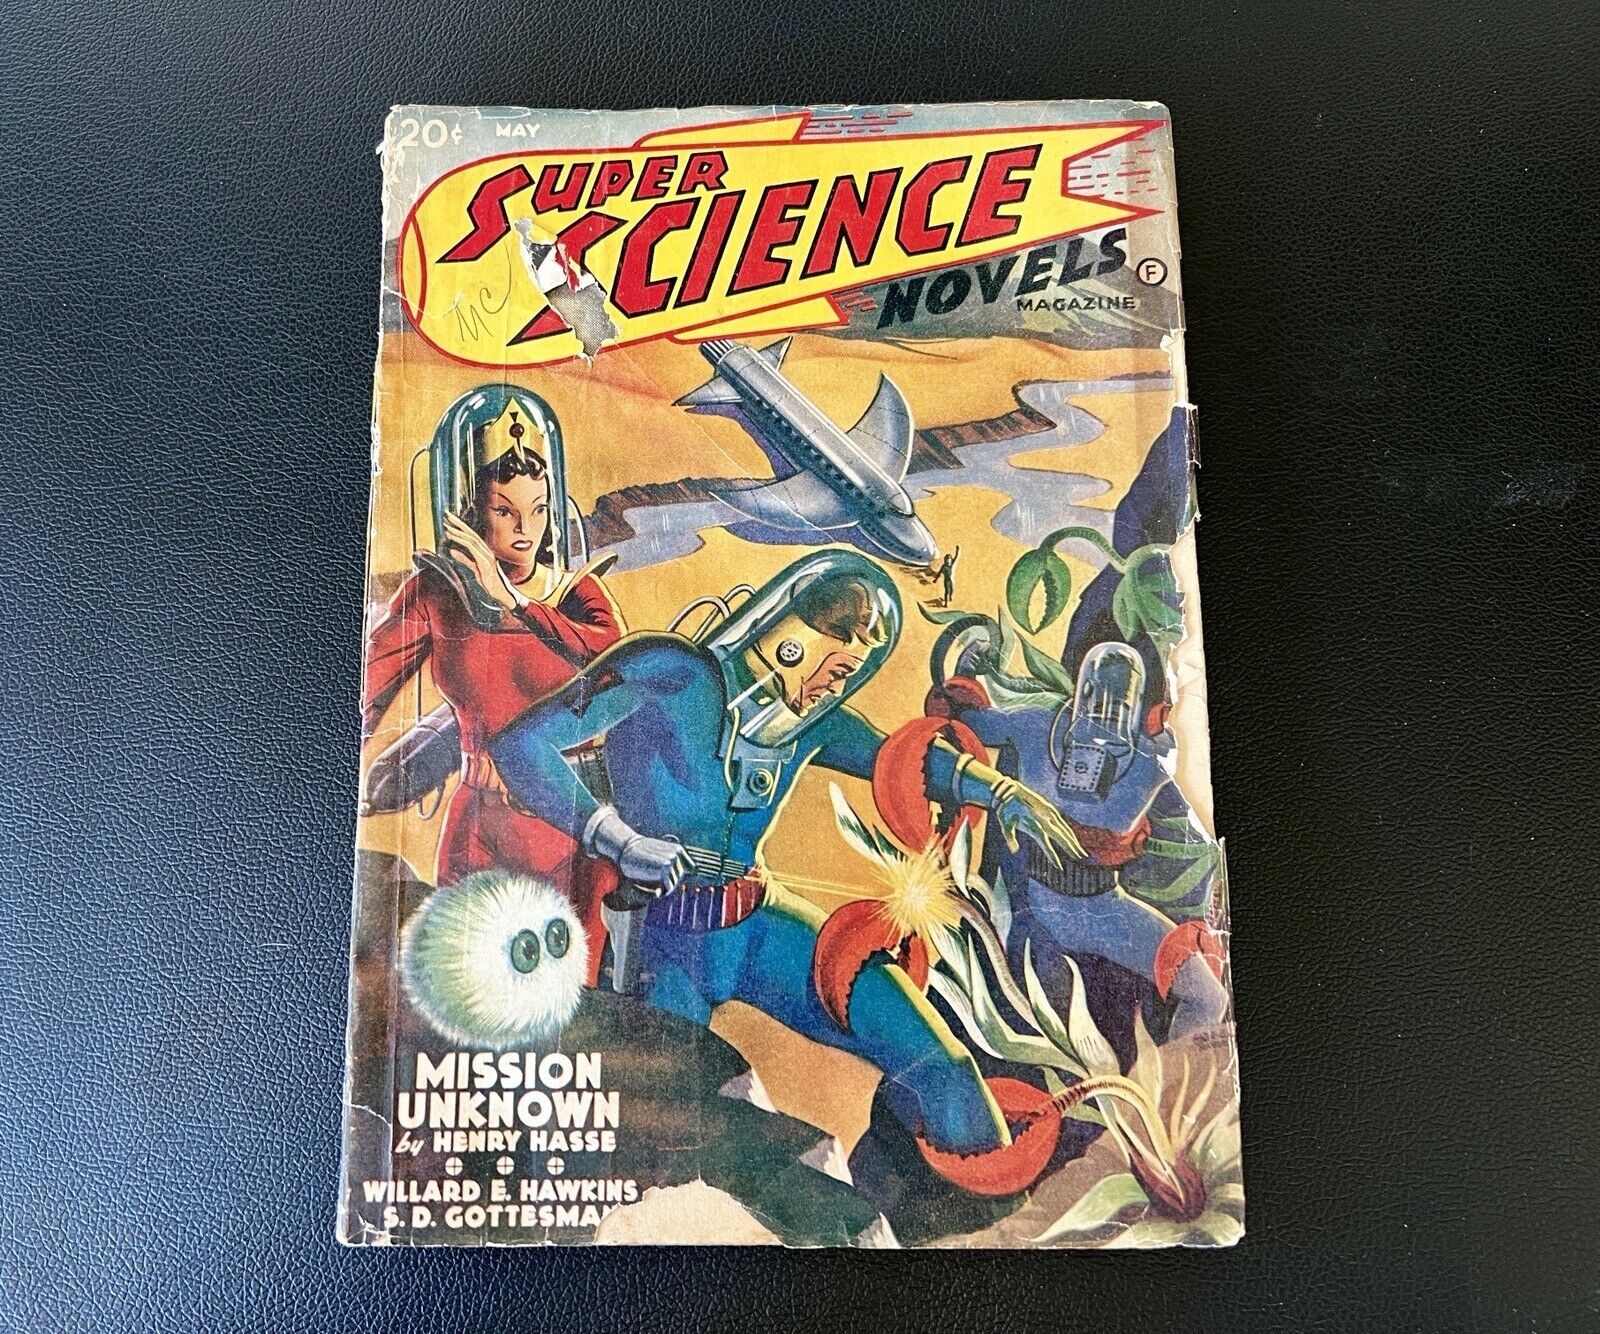 MAY 1941 SUPER SCIENCE NOVELS SCIENCE FICTION MAGAZINE PULP PUBLICATION